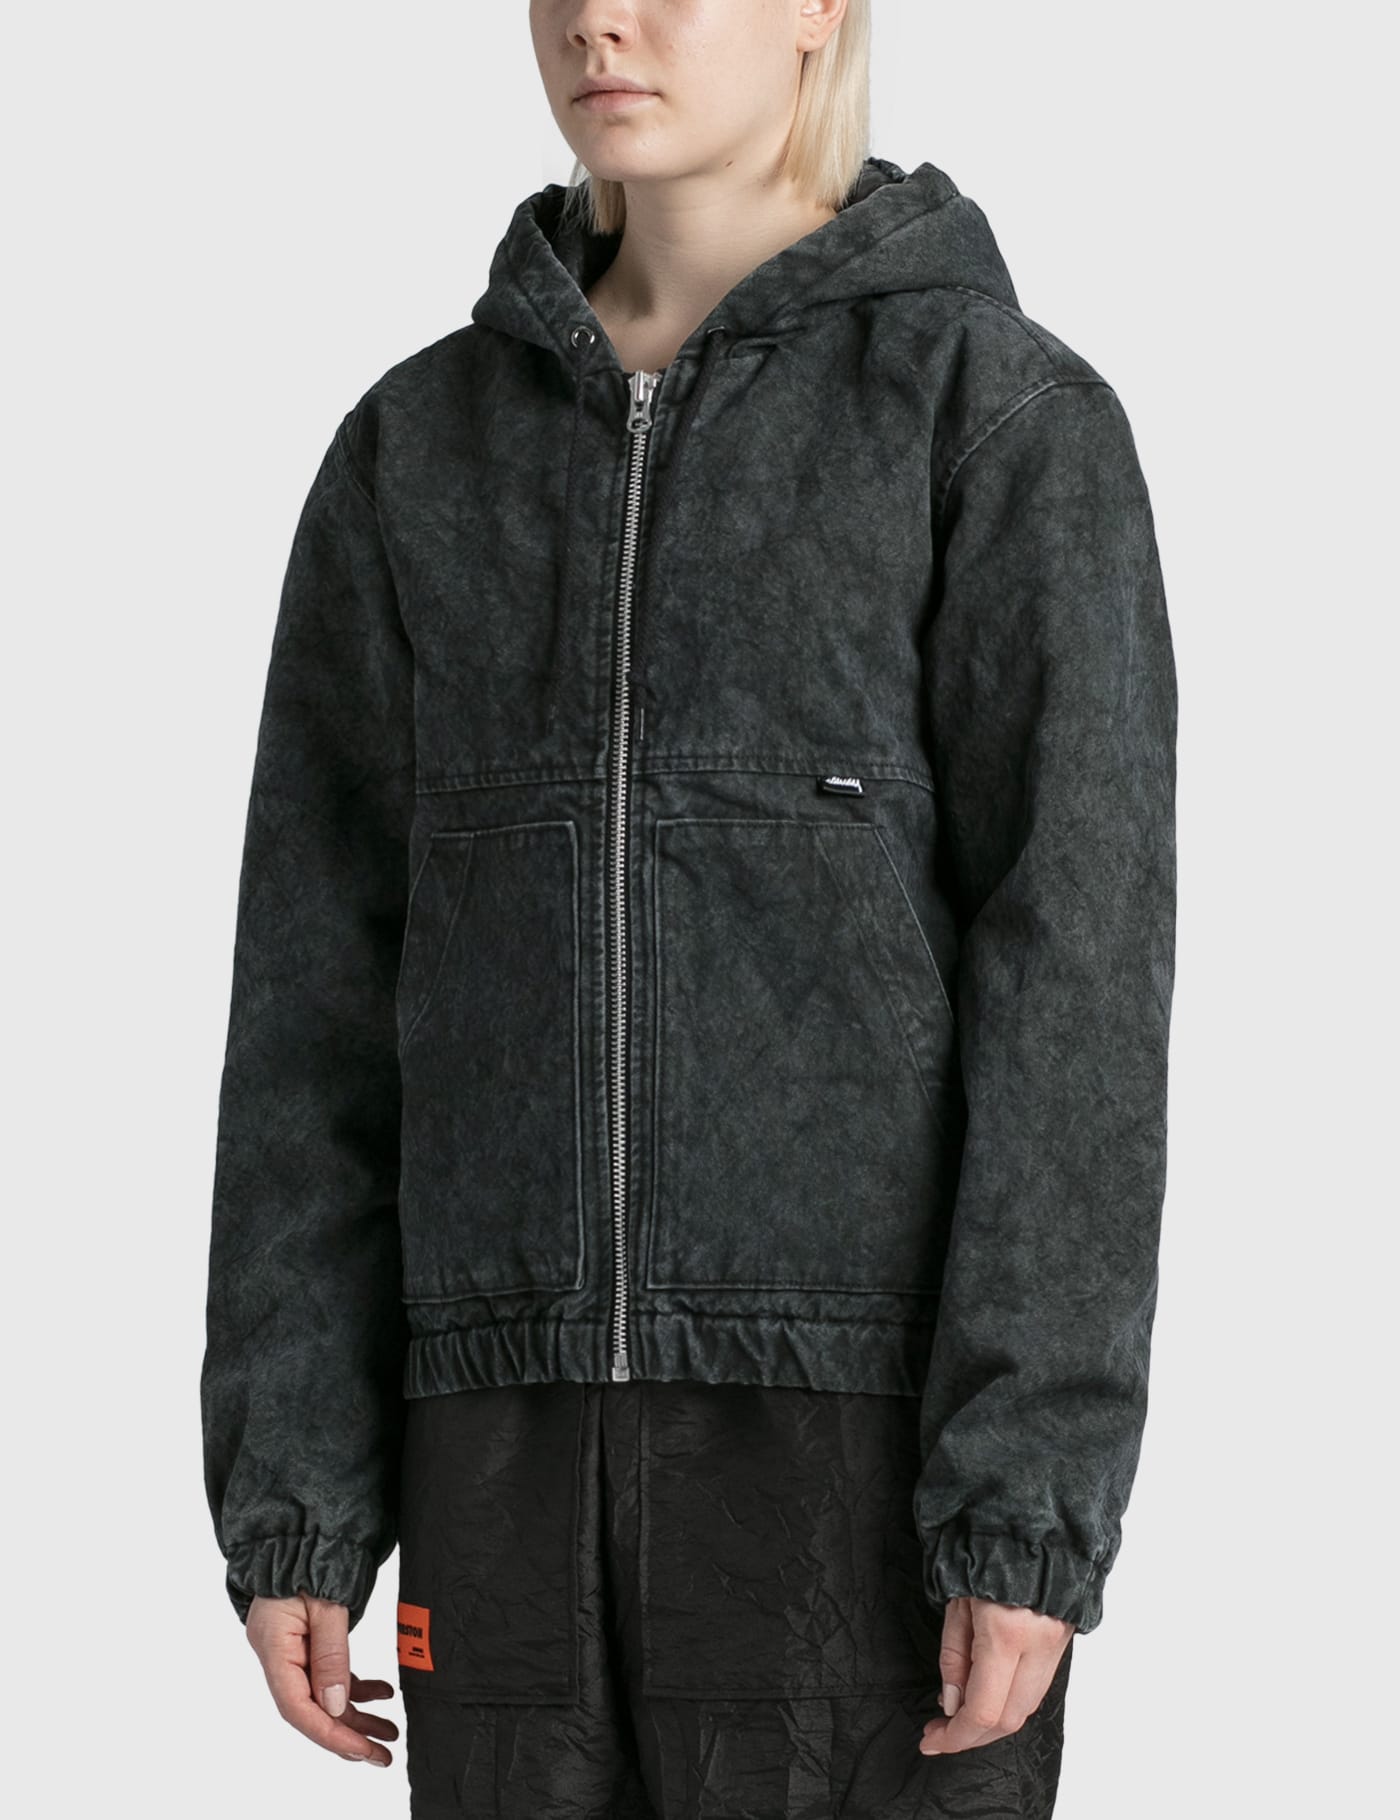 Stüssy - Washed Canvas Insulated Jacket | HBX - Globally Curated 